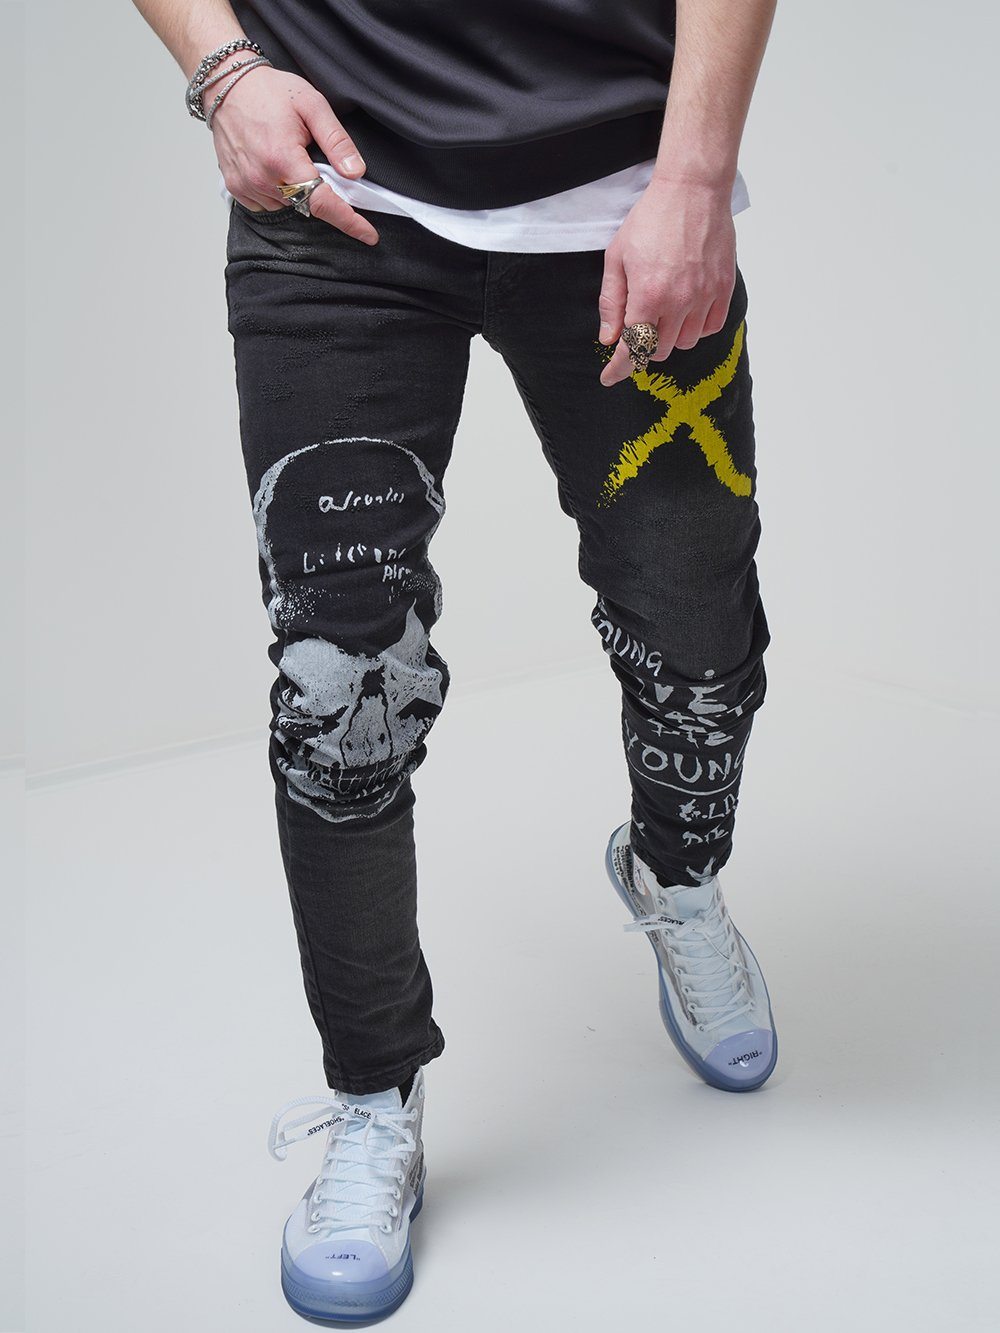 A man wearing a pair of DEAN black jeans with a skull on them.